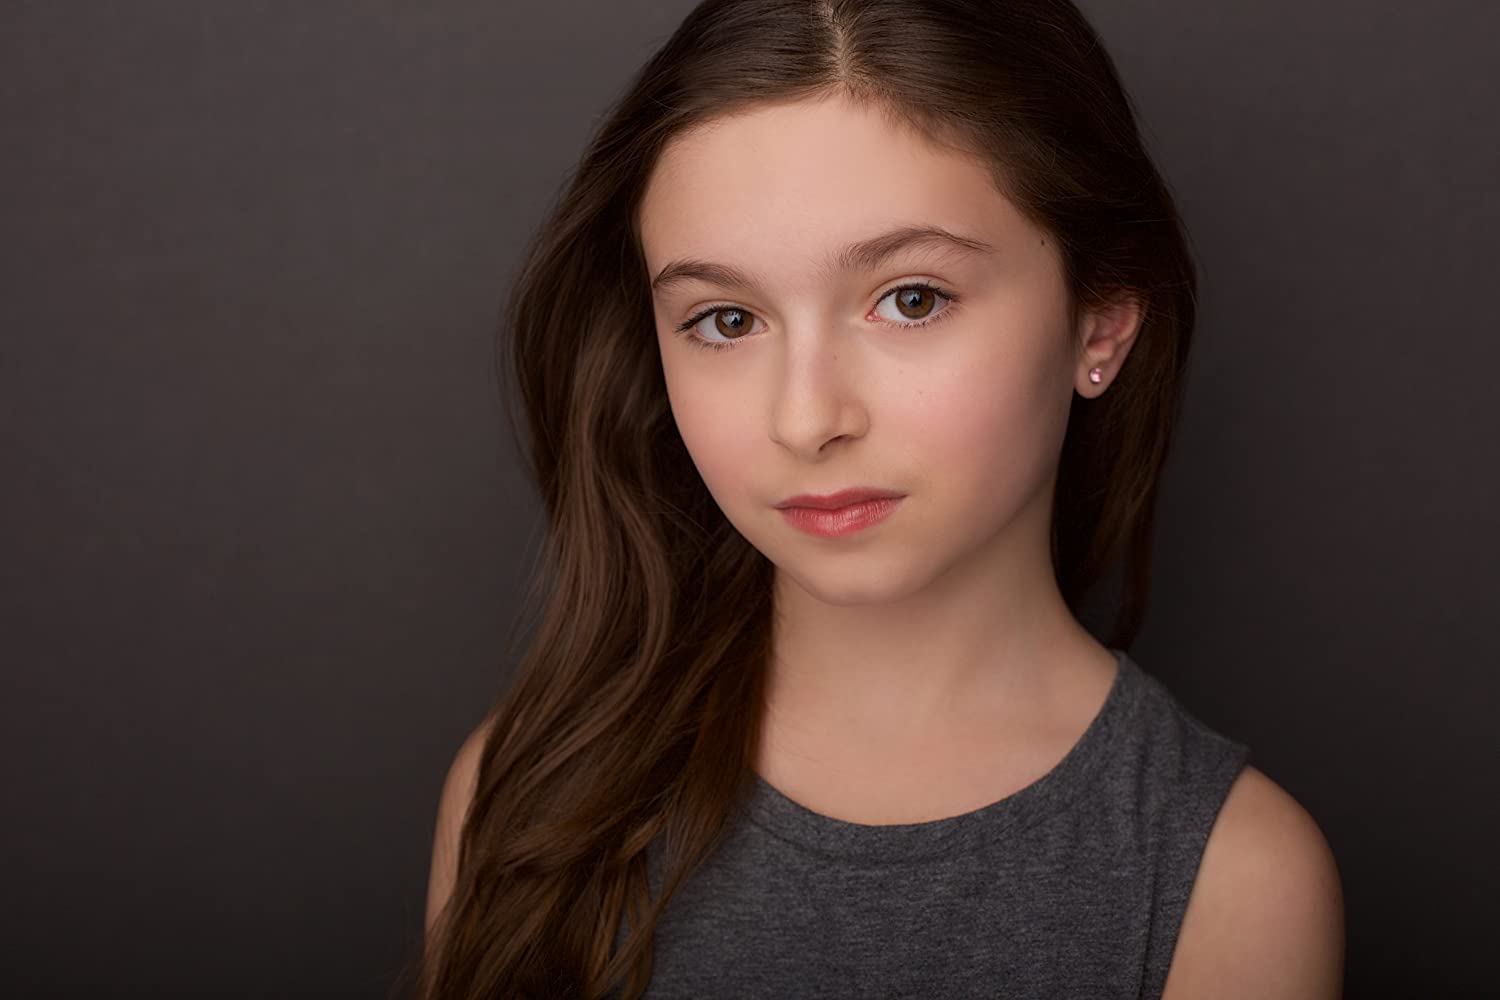 Bella May Mordus Cast in “Nobody’s Home”, Isabel Medina Appears in Commercial for “Nic Blake and the Remarkables”, and more!